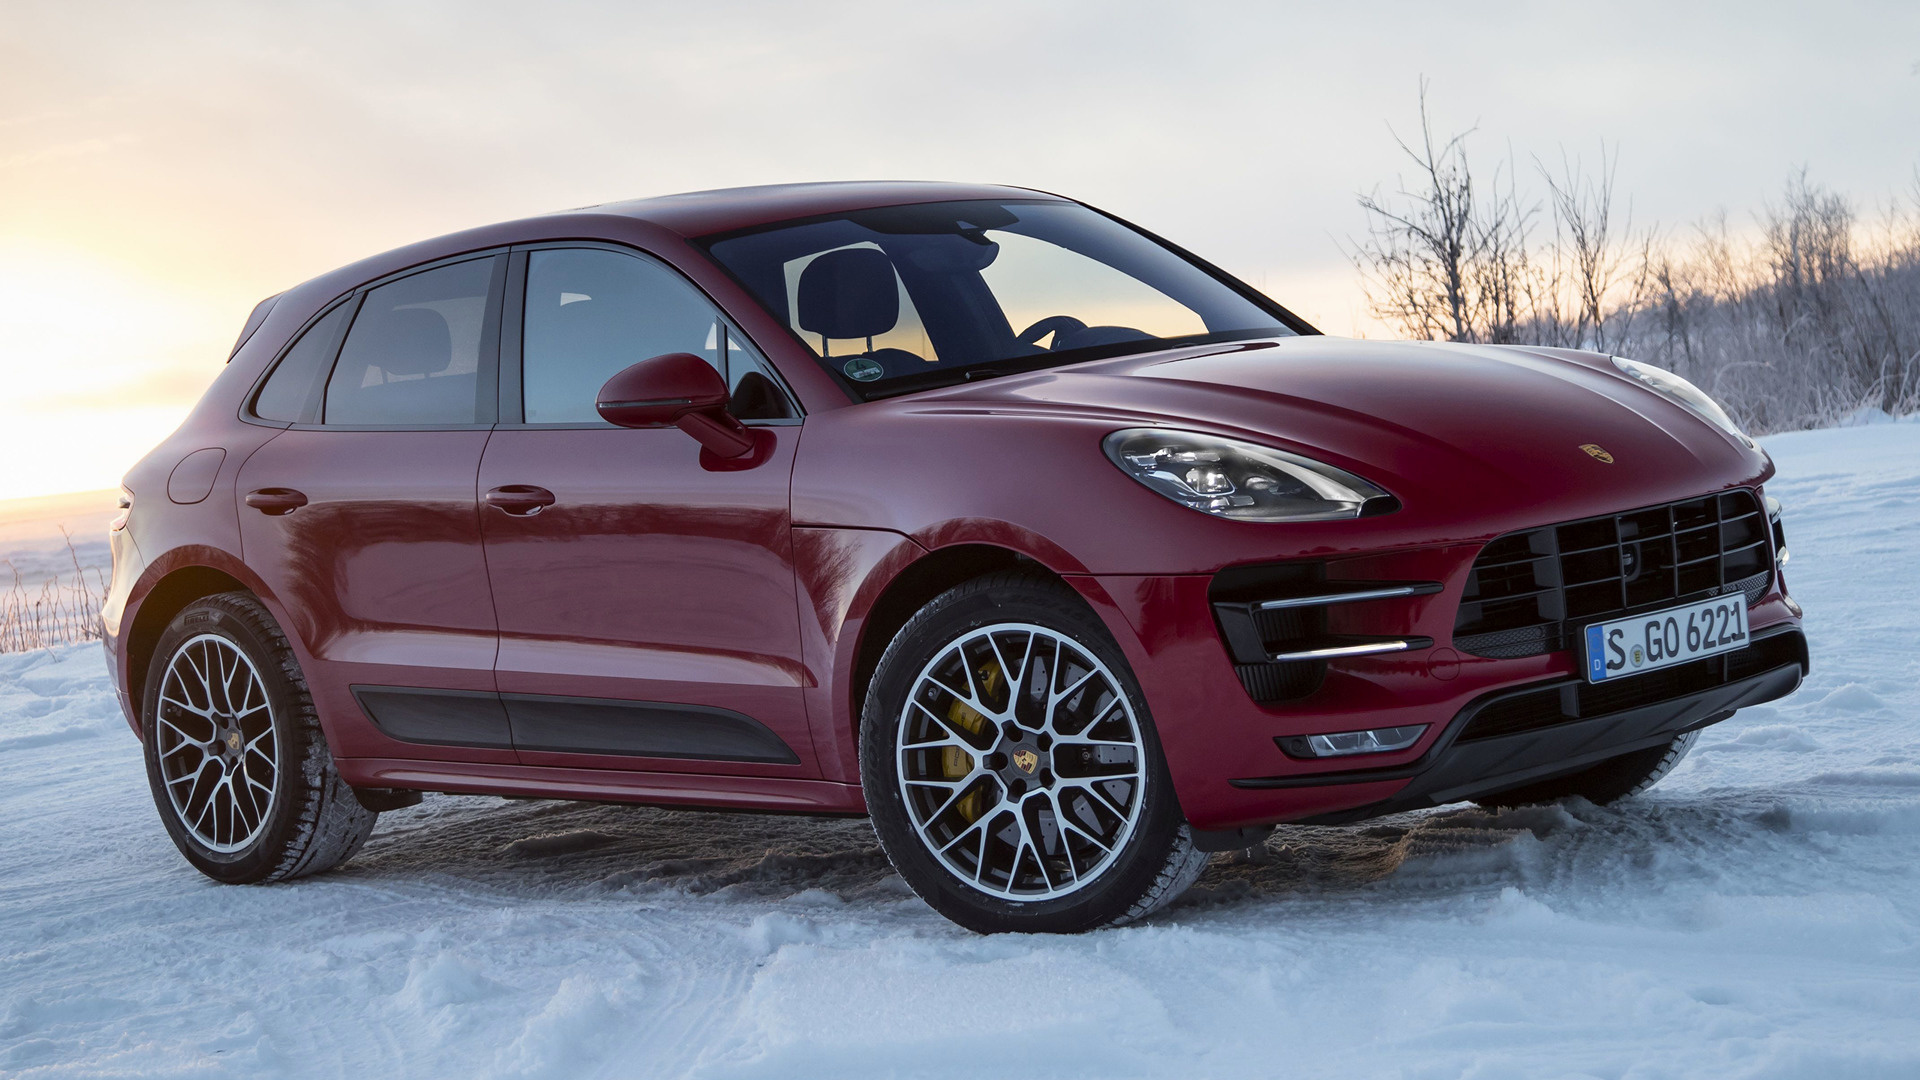 Popular Porsche Macan Turbo Performance Package Image for Phone